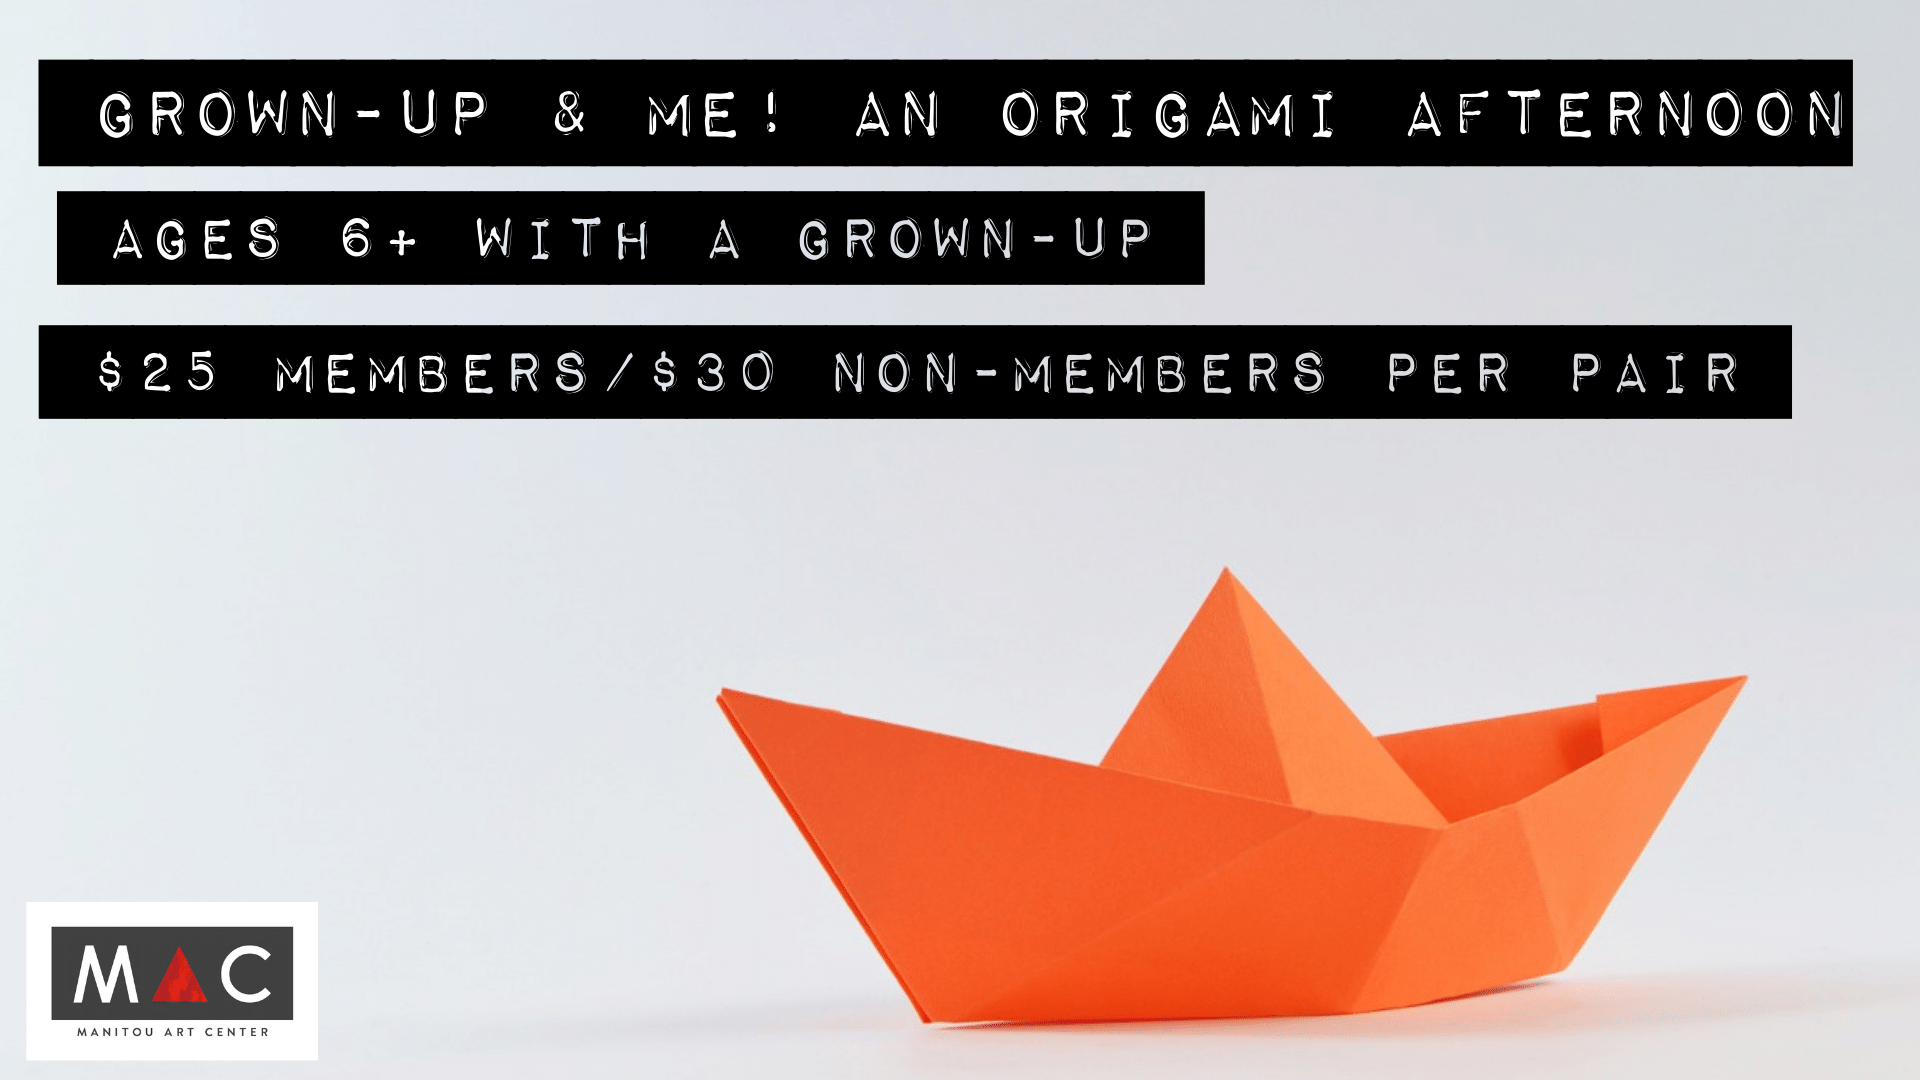 Origami art with event title